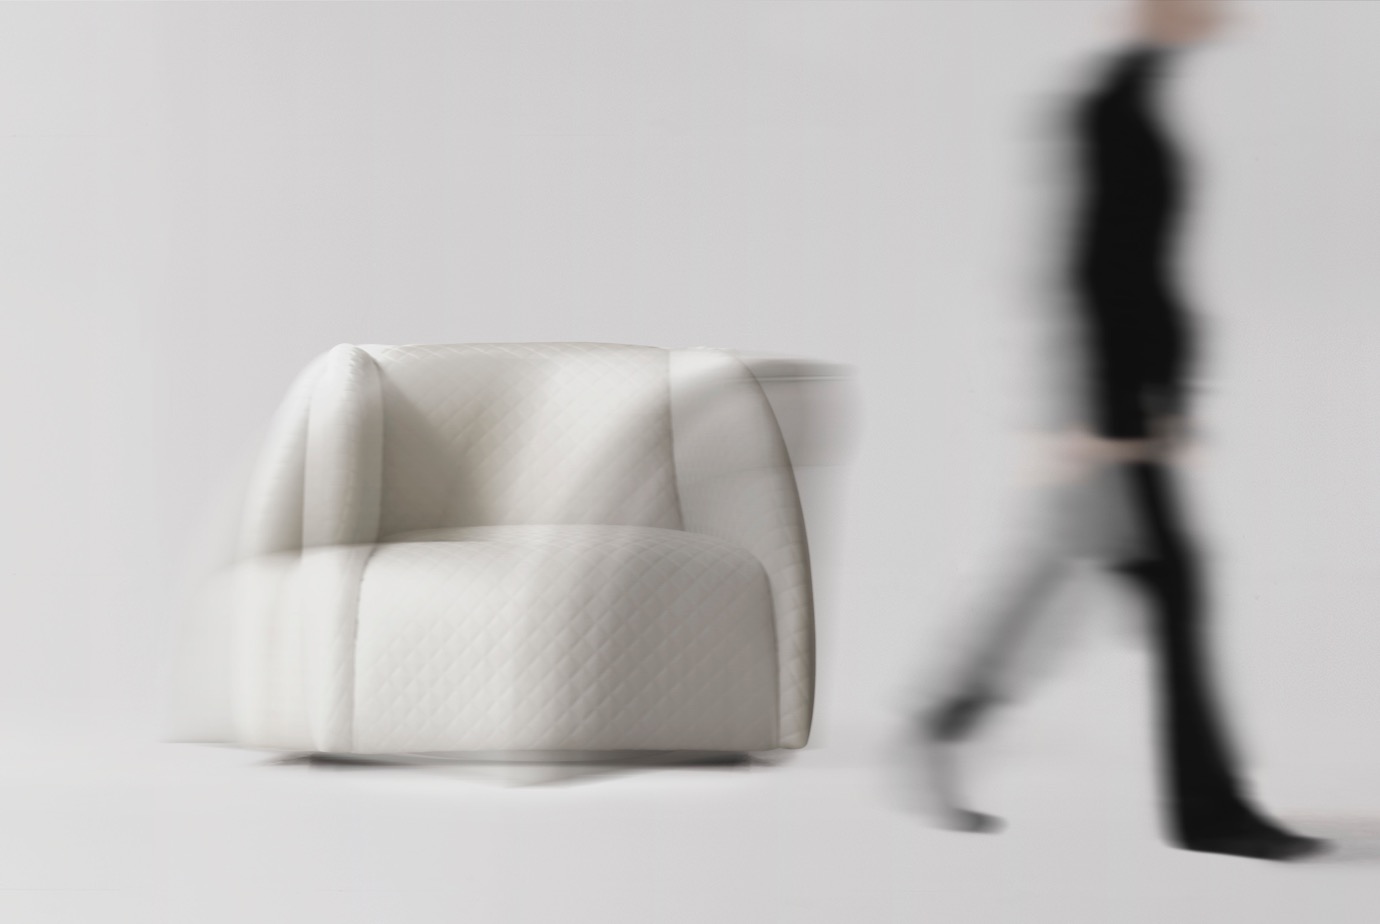 Embracing Outline - Swivel Armchair / Carlos Soriano